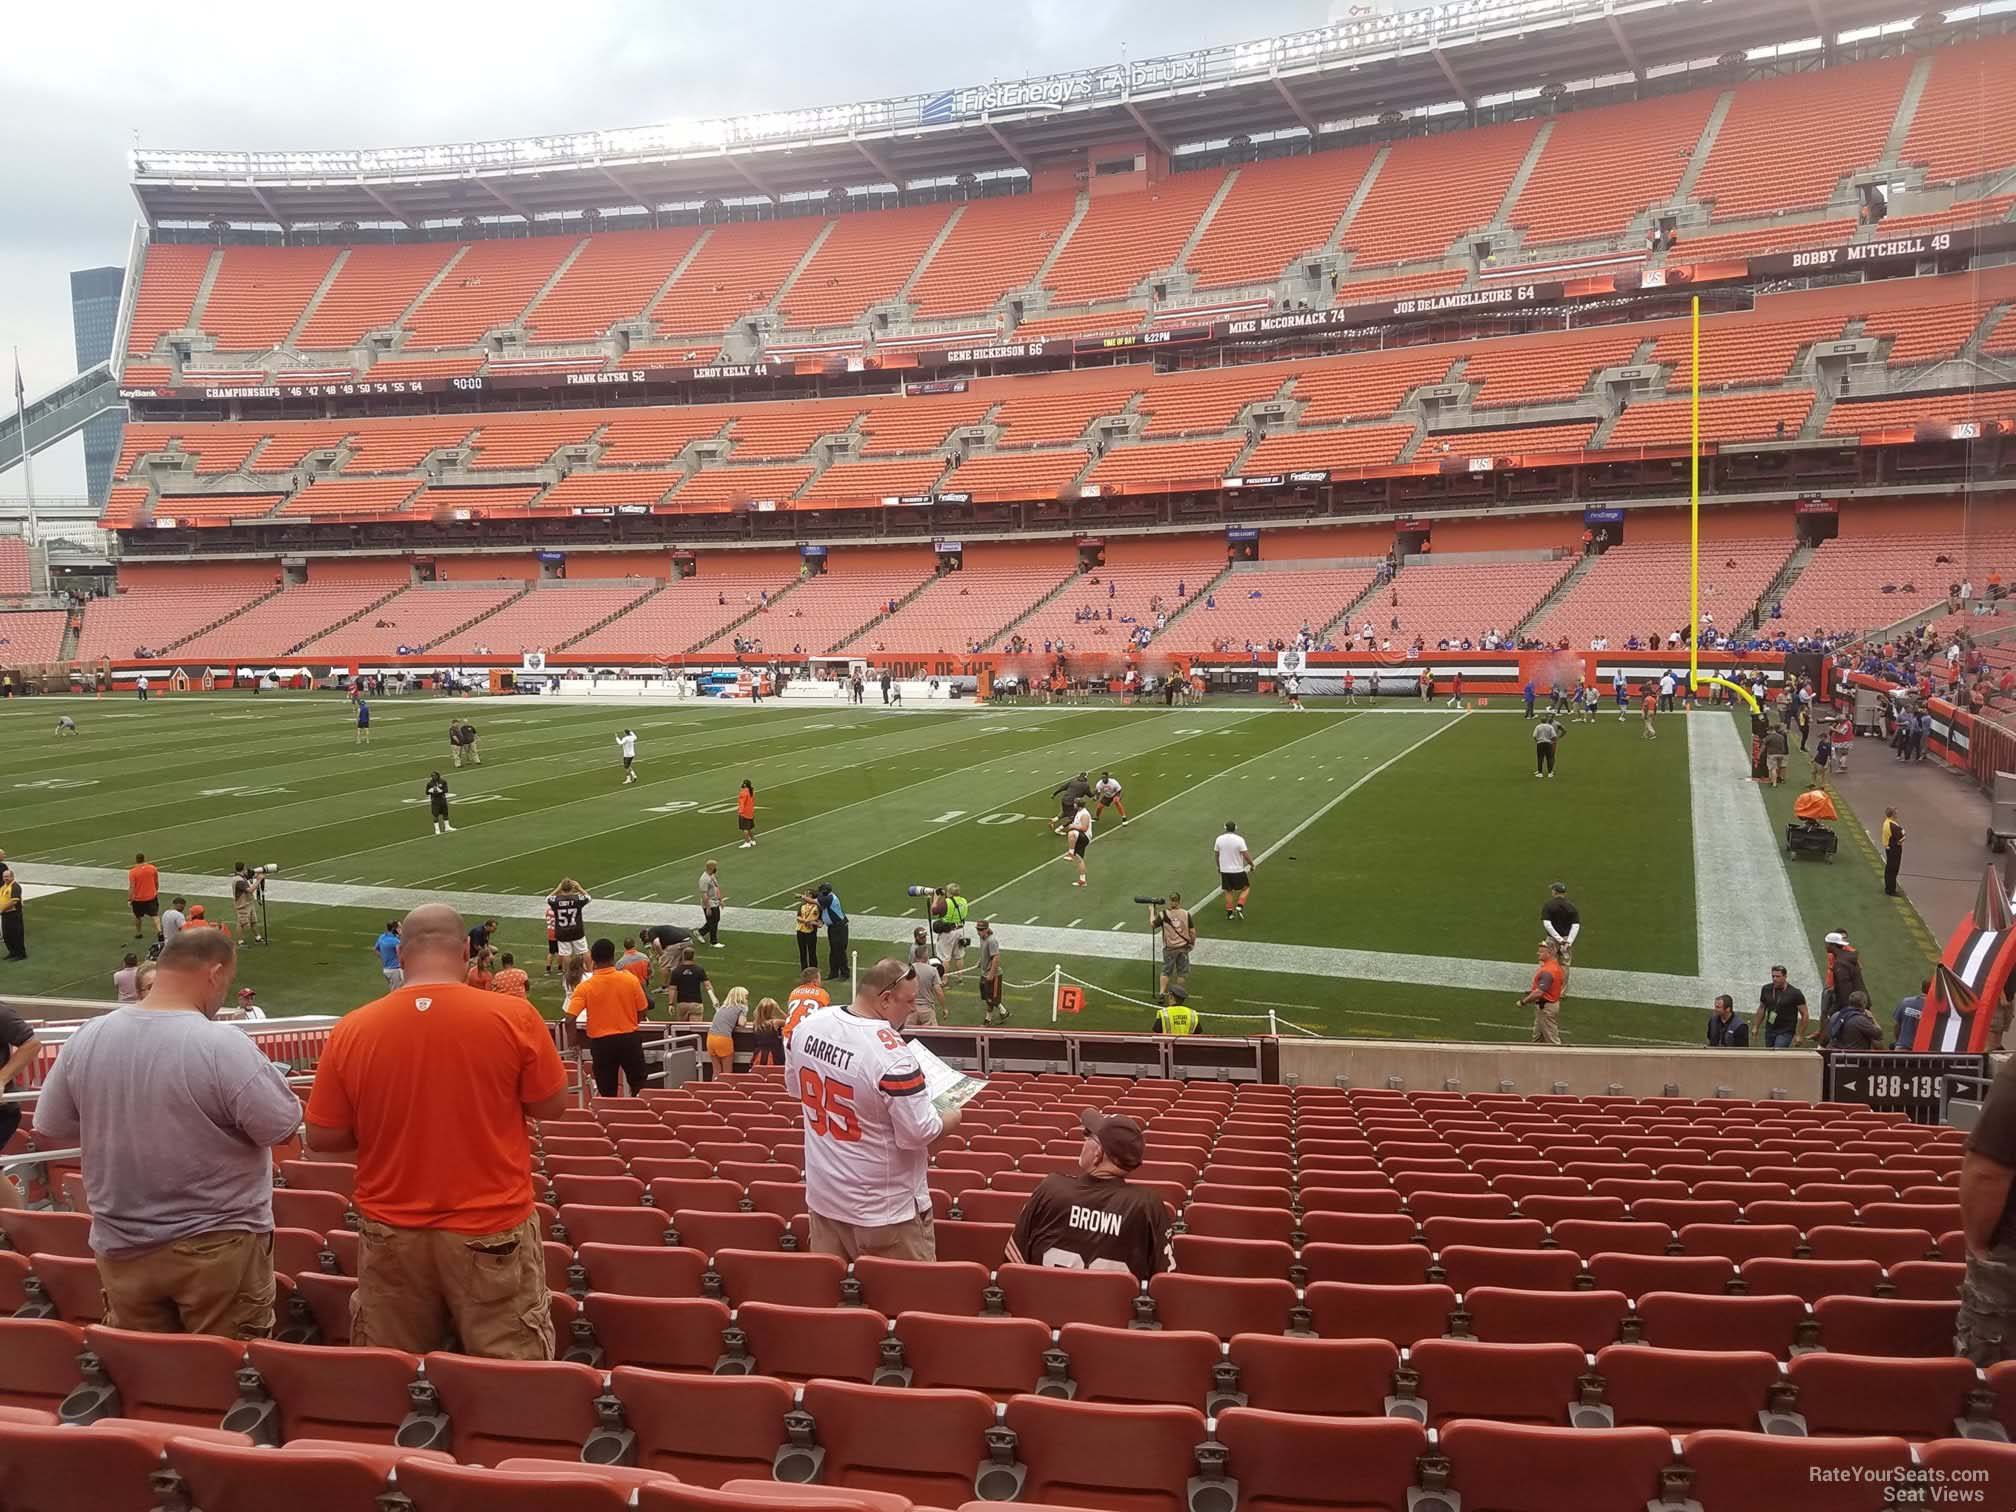 section 138, row 19 seat view  - cleveland browns stadium